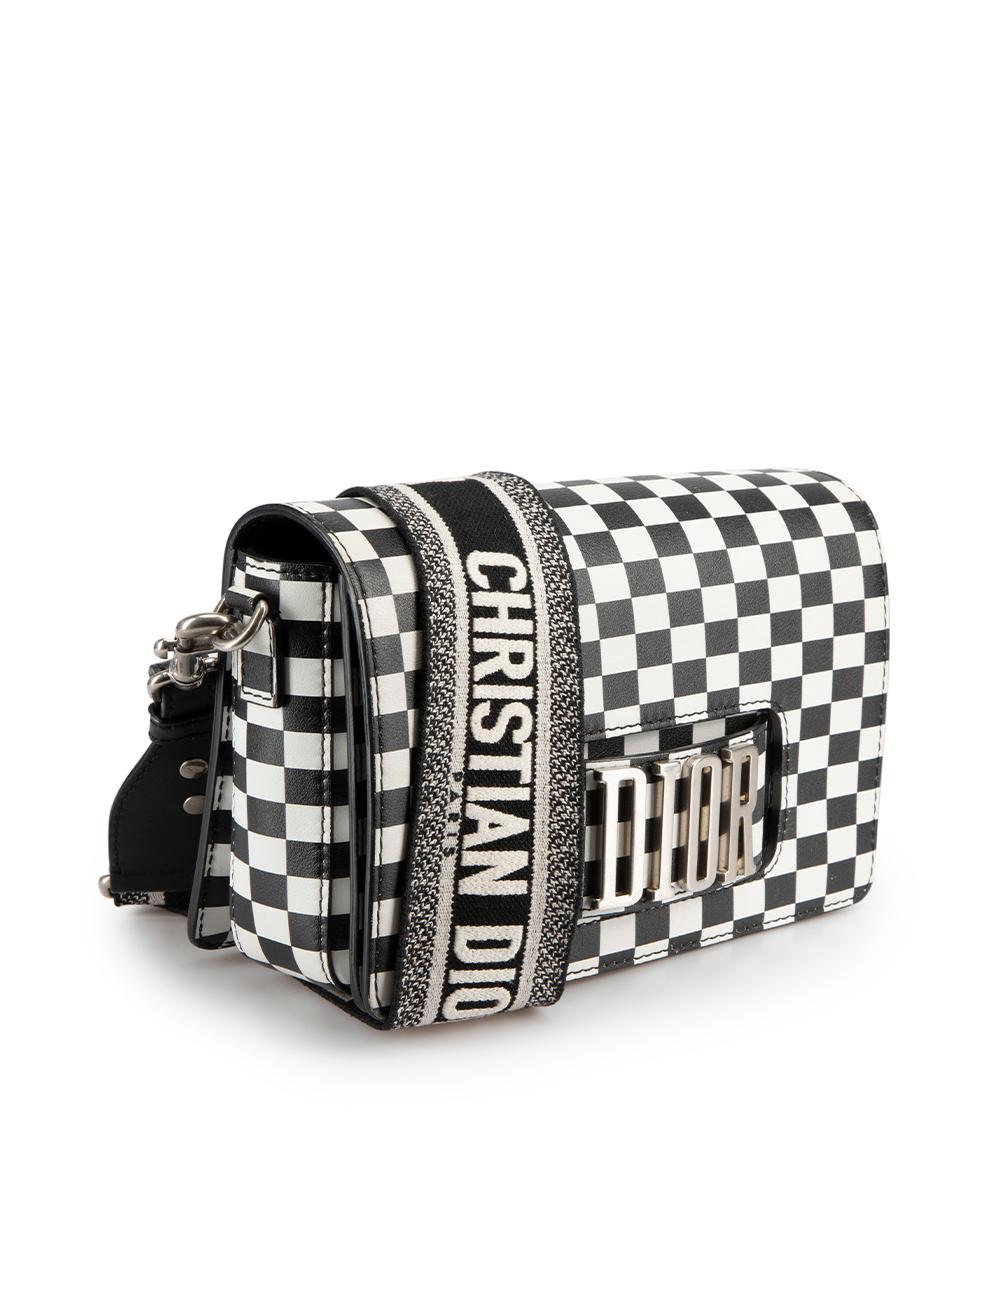 CONDITION is Very good. Minimal wear to bag is evident. Minimal wear to the exterior of bag with chips to the check print on this used Christian Dior designer resale item.



Details


Black & white checkered 

Leather

Crossbody bag

1x Magnetic